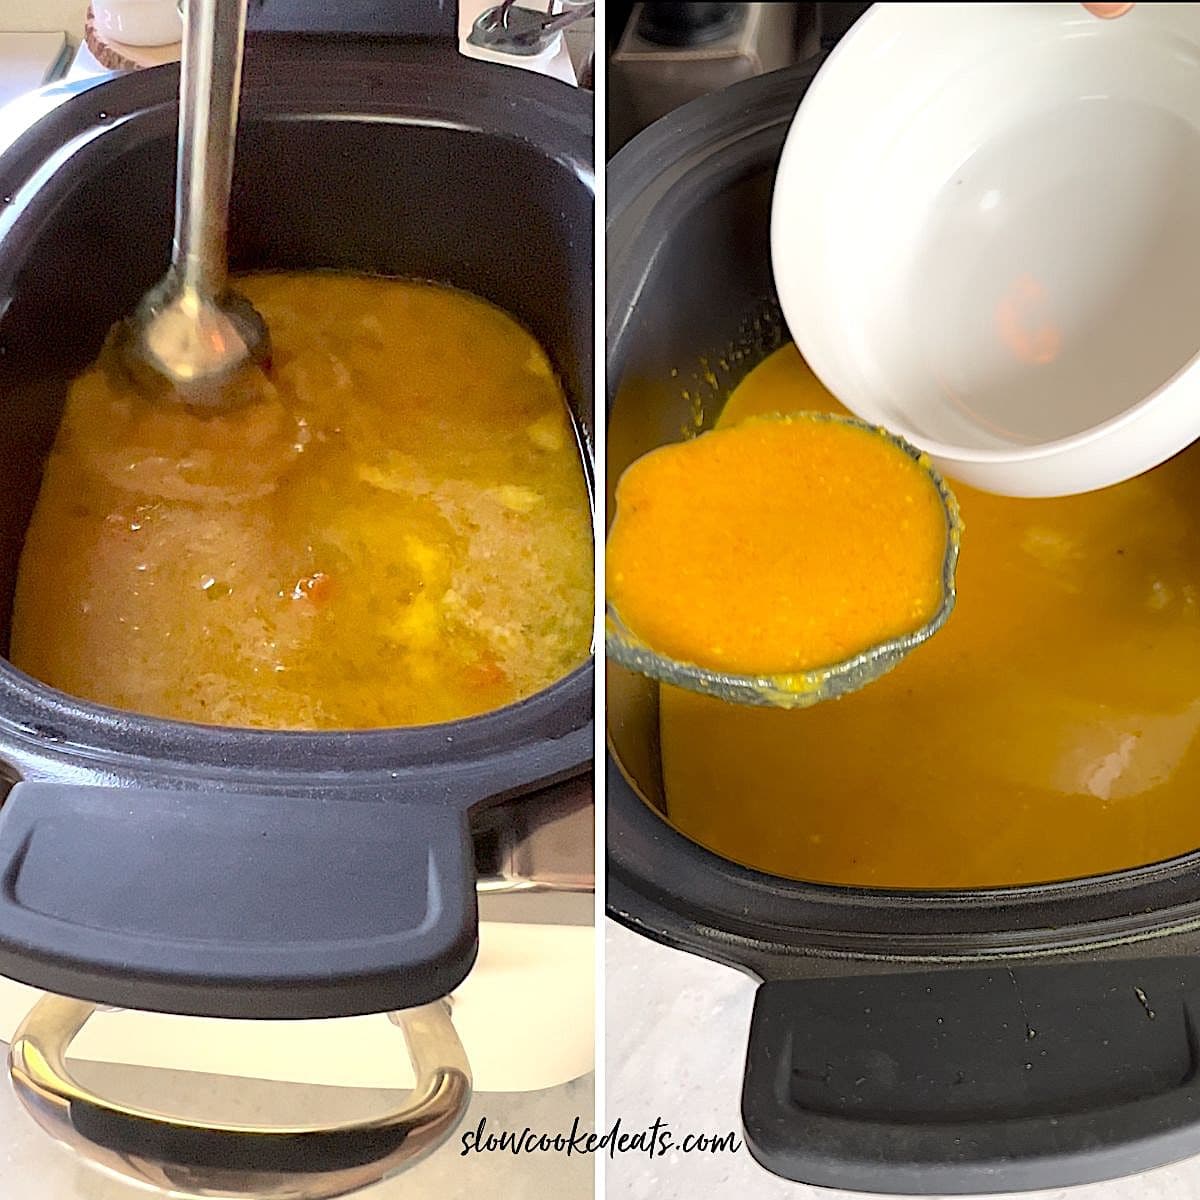 blending and then serving carrot soup out of a black oval crock pot.